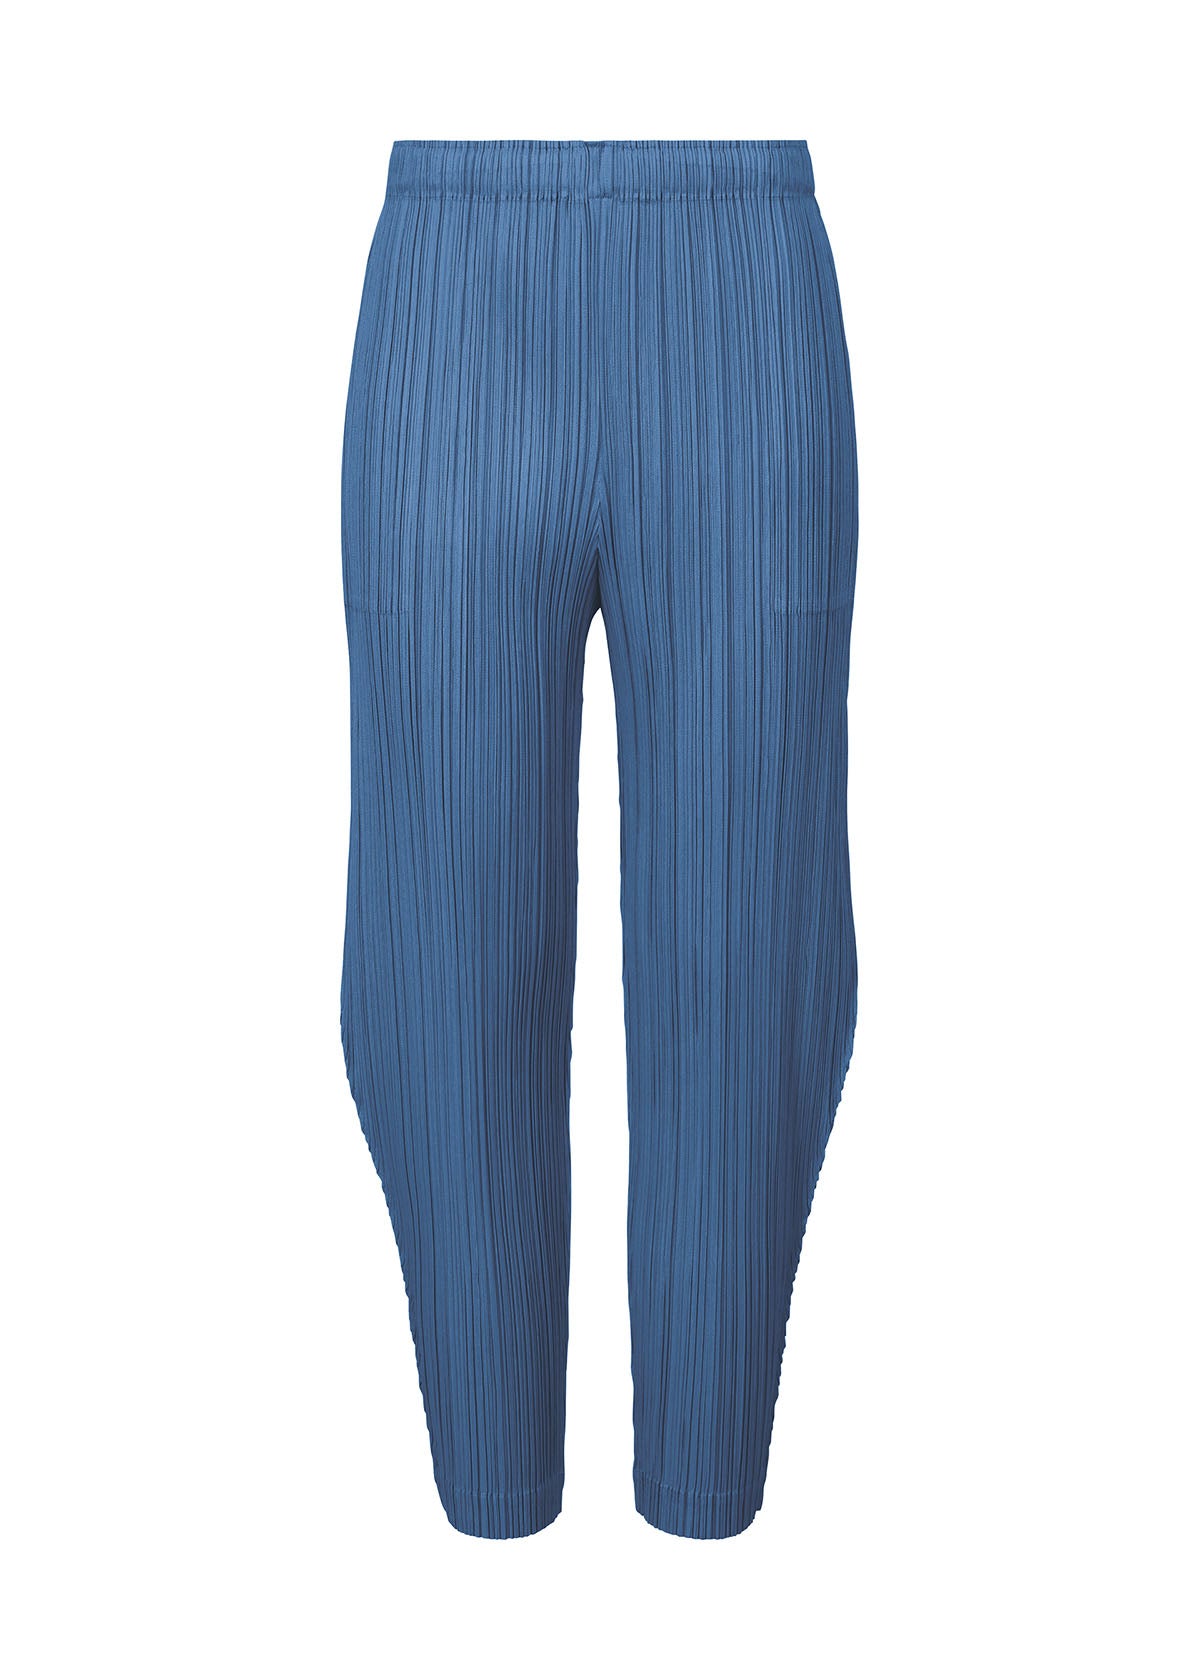 MONTHLY COLORS : MARCH PANTS | The official ISSEY MIYAKE ONLINE